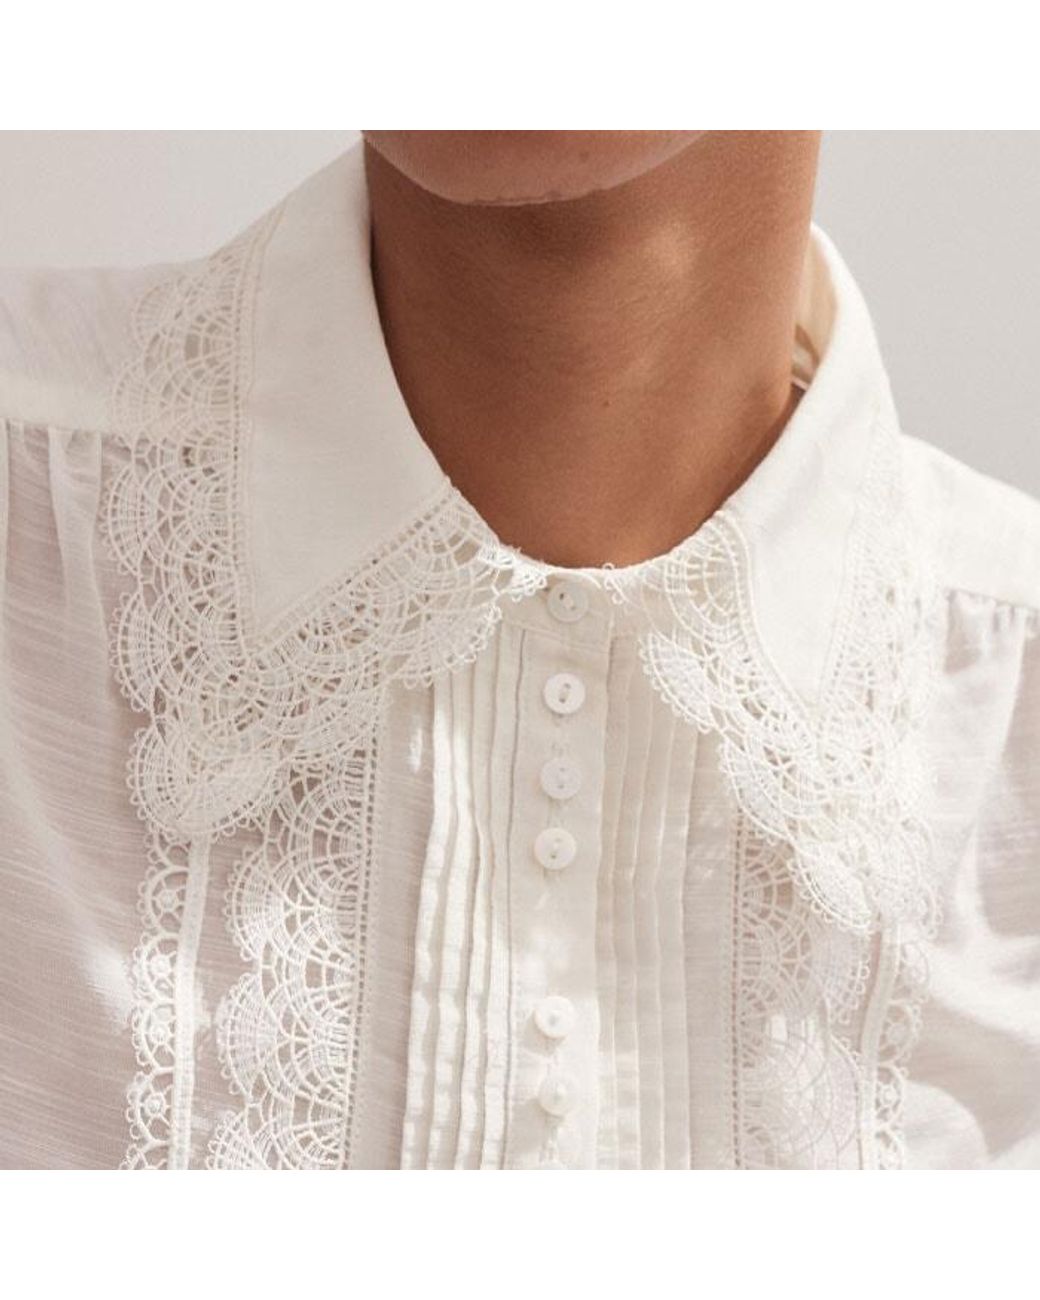 LACE INSET EMBROIDERED BUTTON TOP